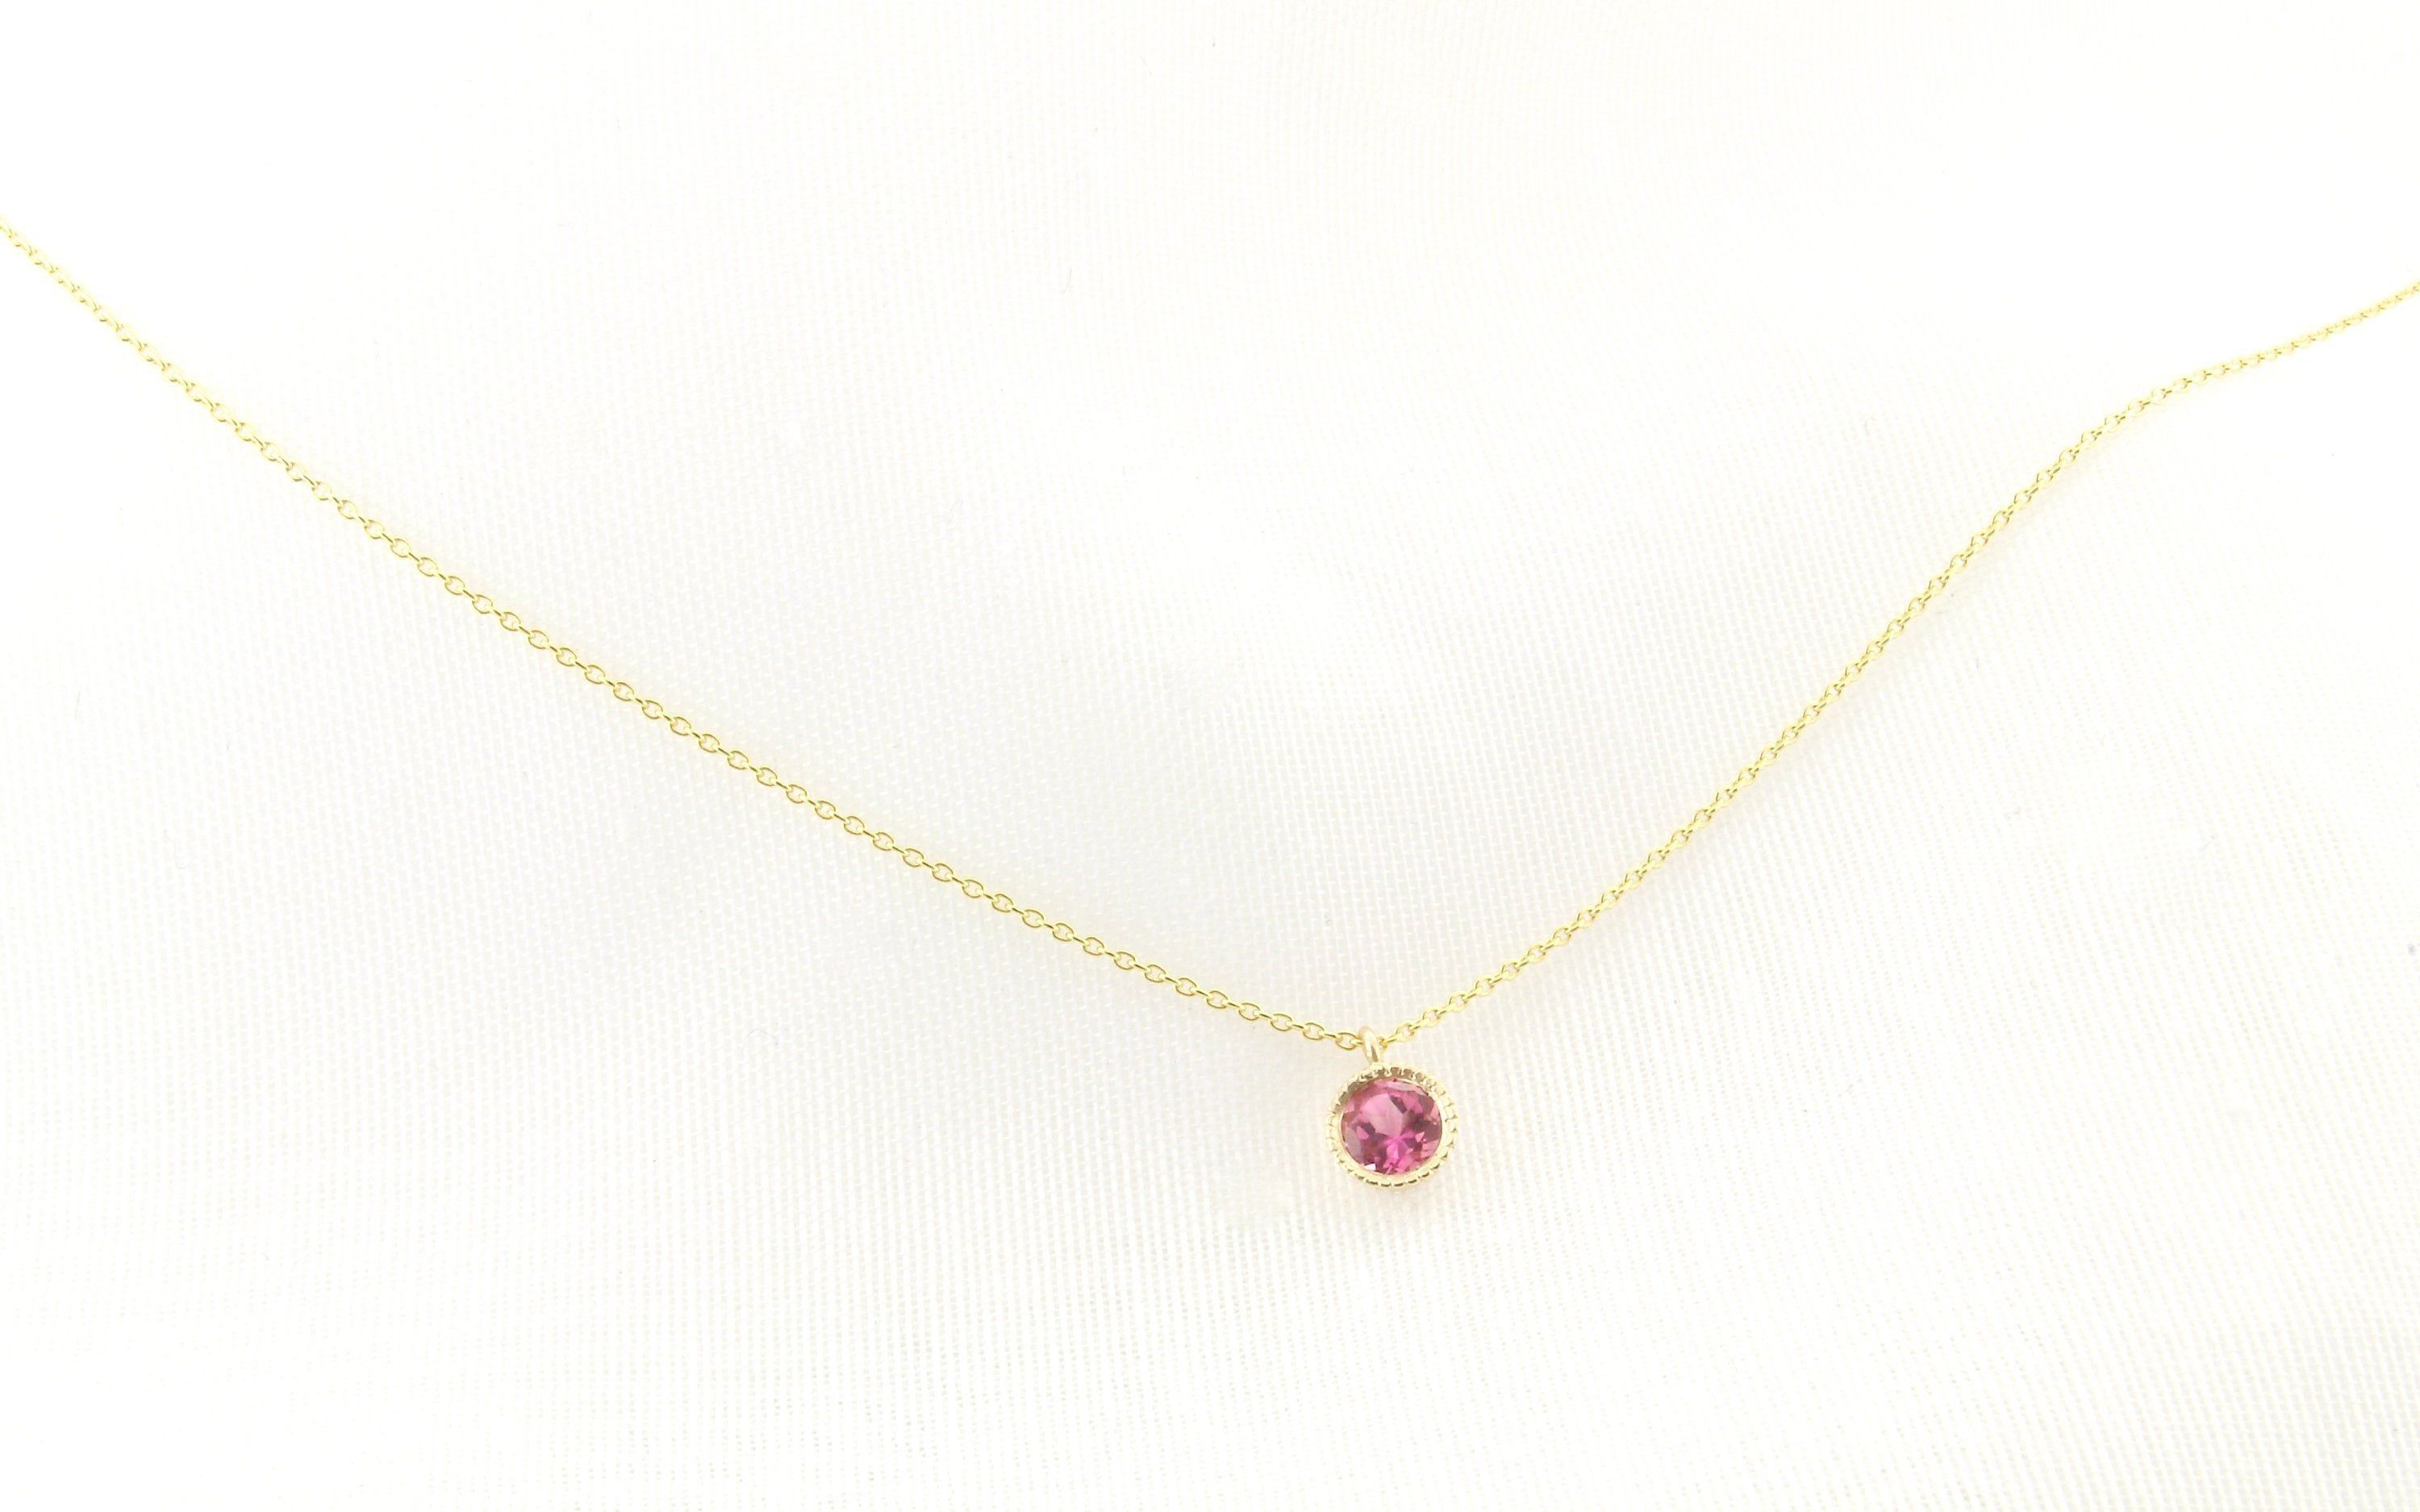 Pink Tourmaline Droplet Pendant Necklace, 14k Gold, Pink Tourmaline  Necklace, Birthstone Jewelry, Graduation Gift, Brookemicheledesigns Within Newest Garnet January Droplet Pendant Necklaces (View 10 of 25)